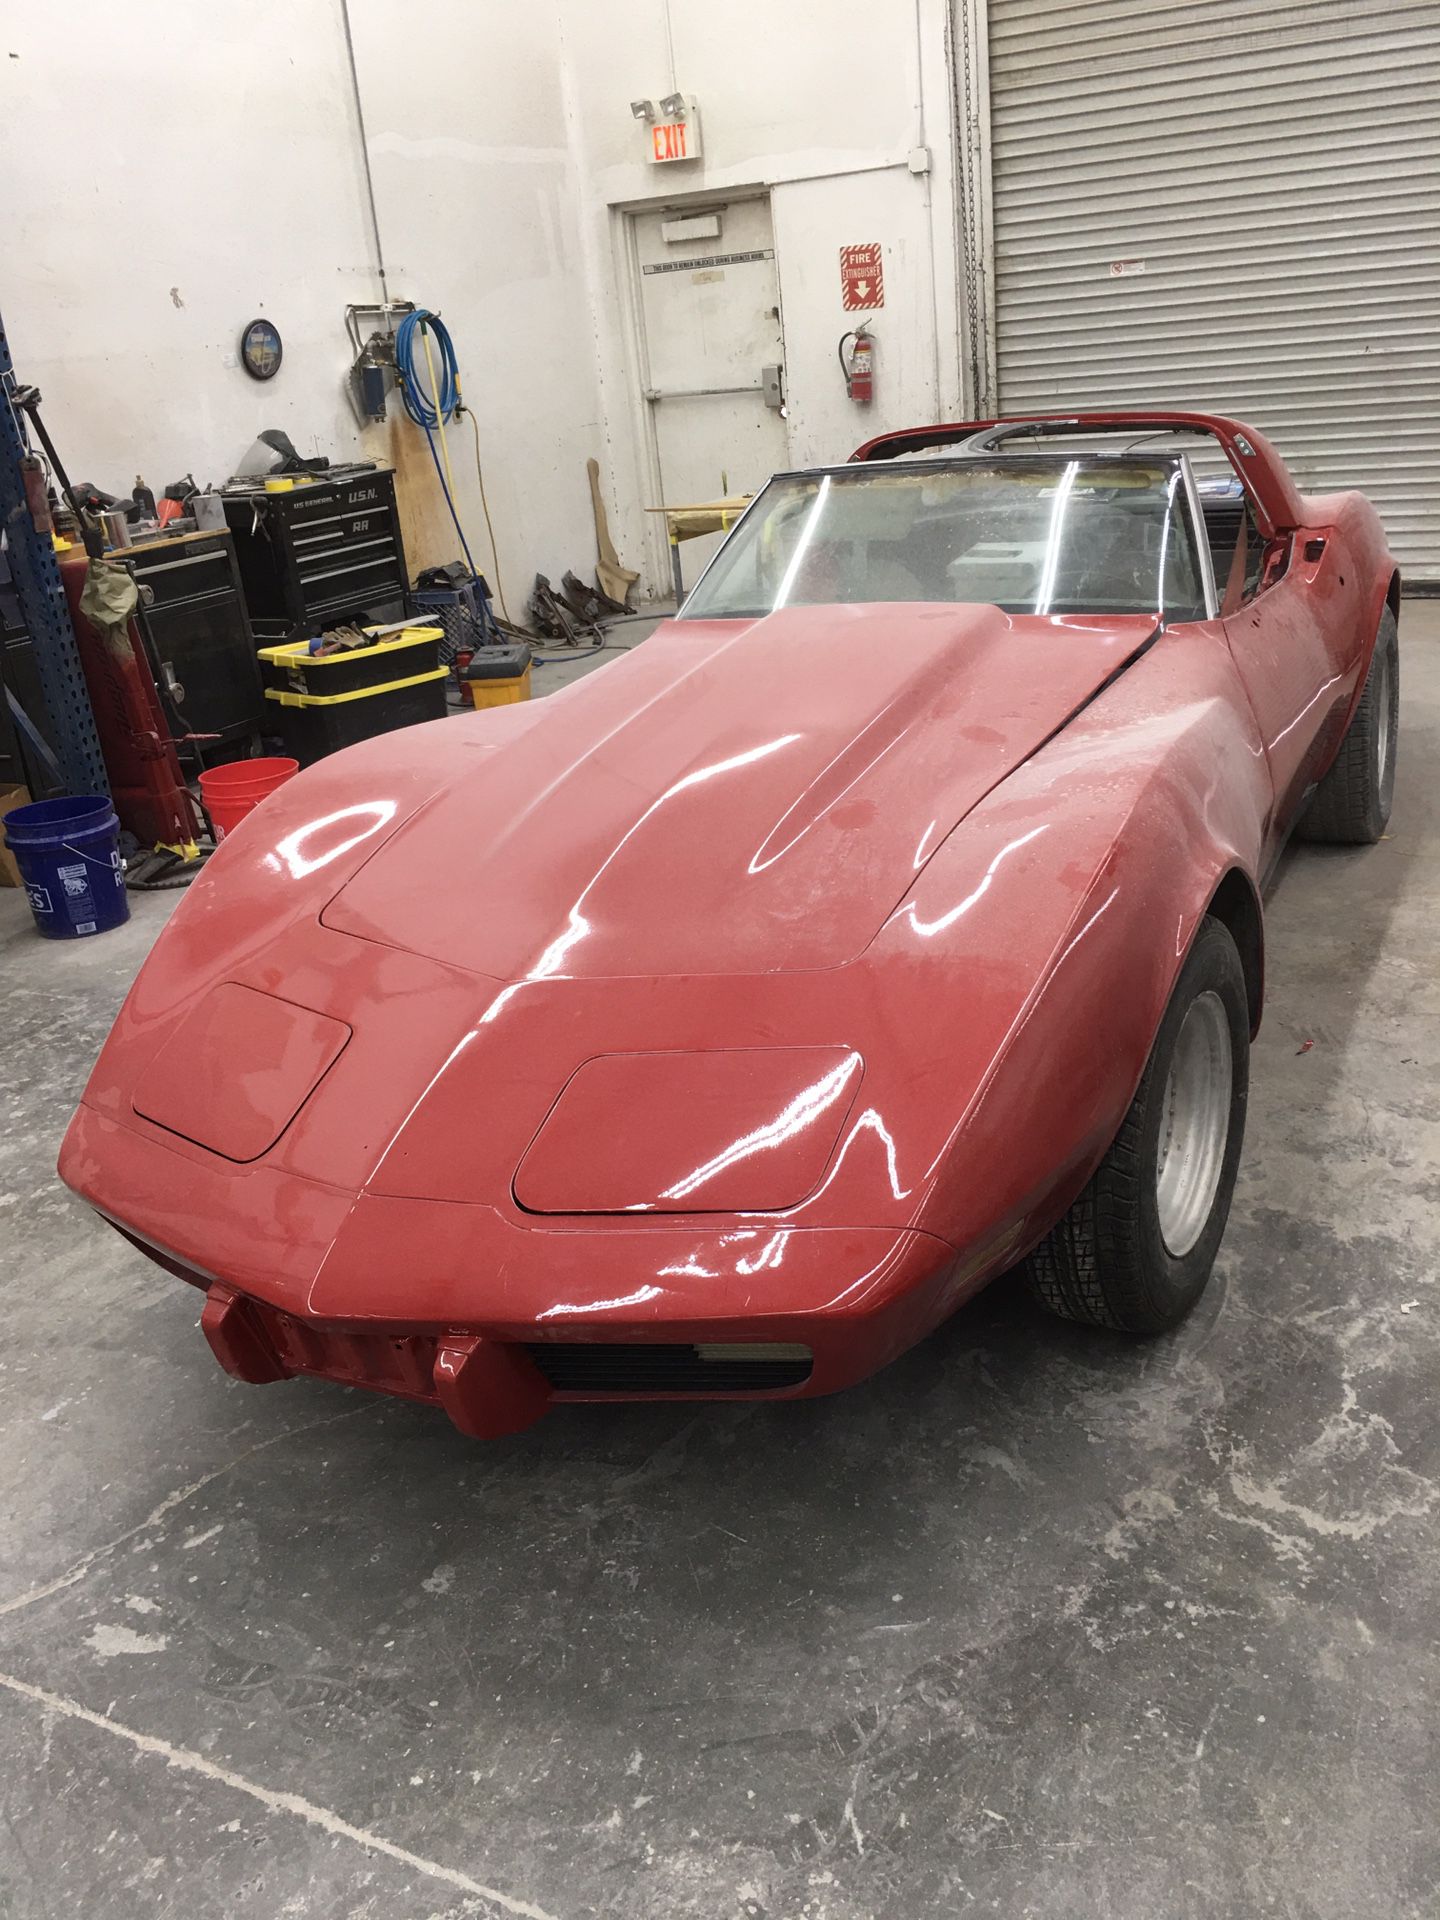 Chevy Corvette Project Car Getting Too Old To Finish